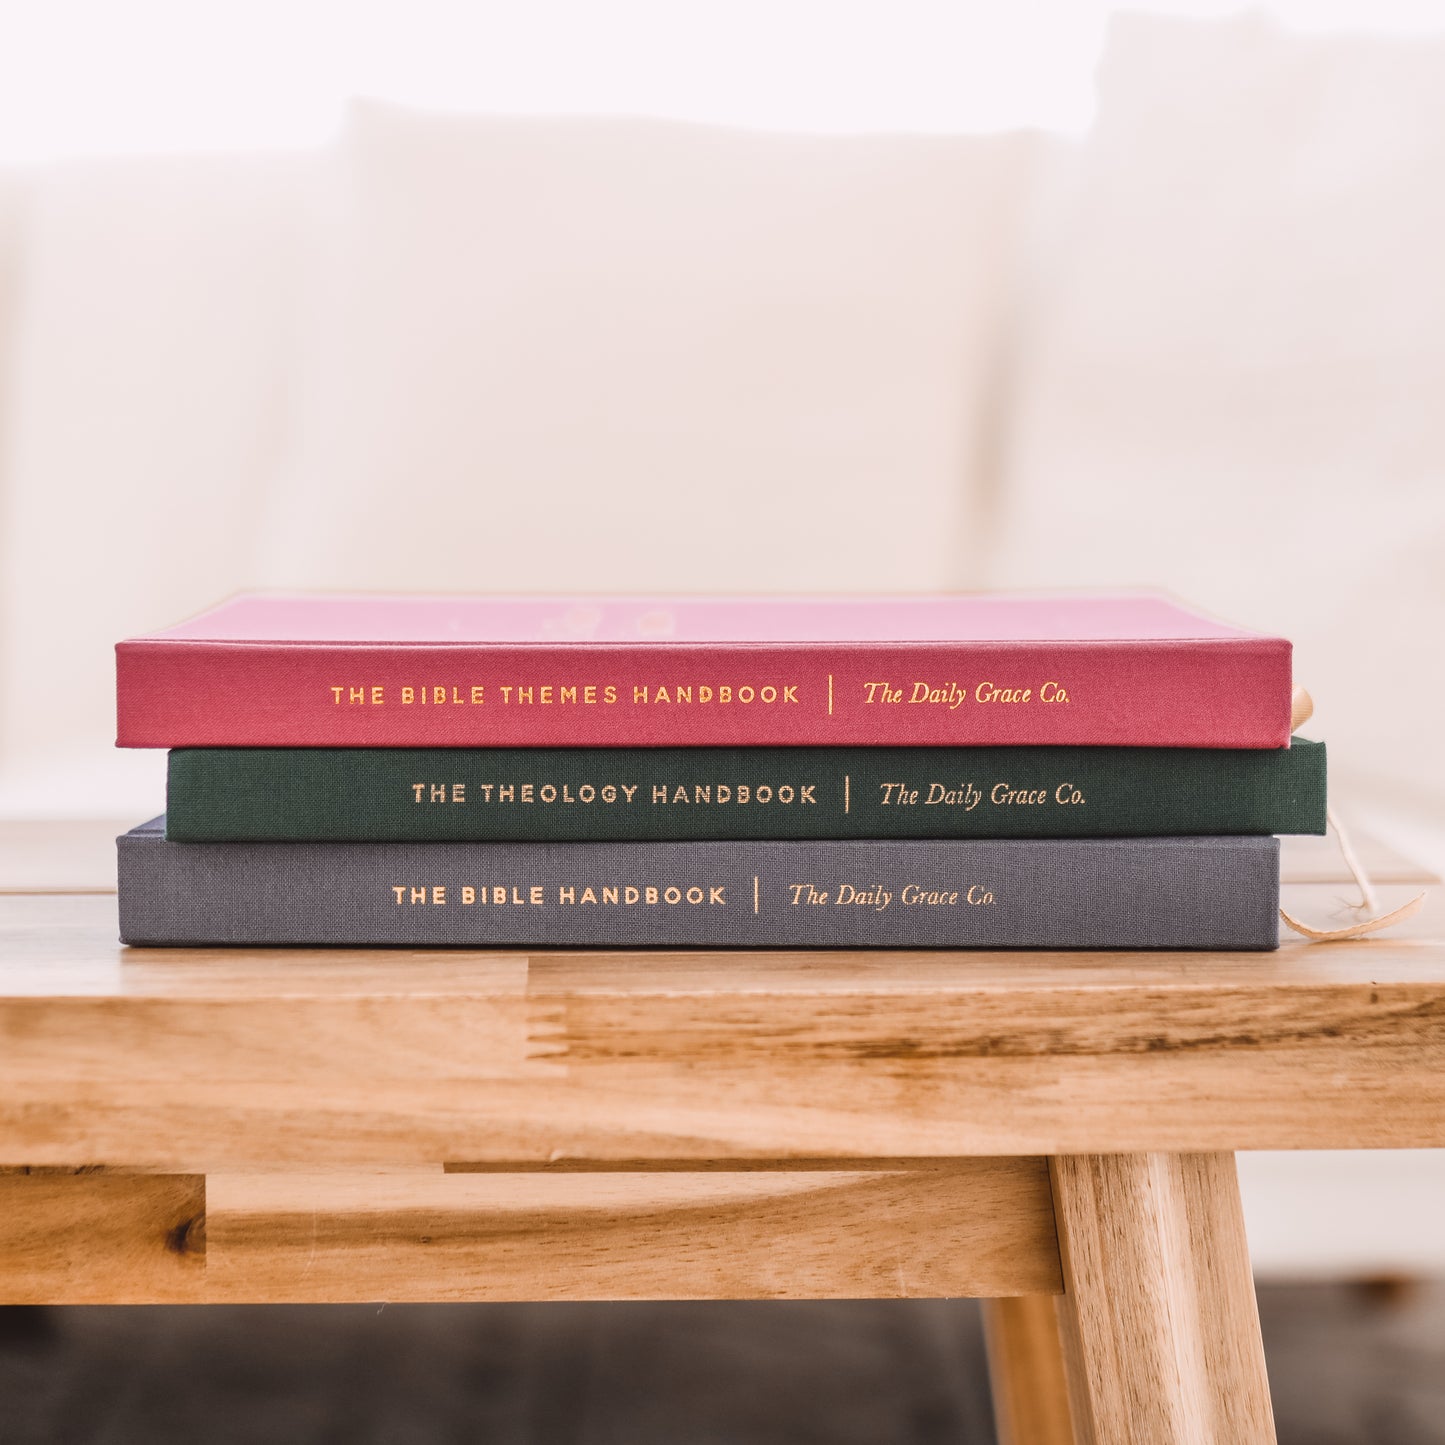 The Daily Grace Co. Handbook Collection